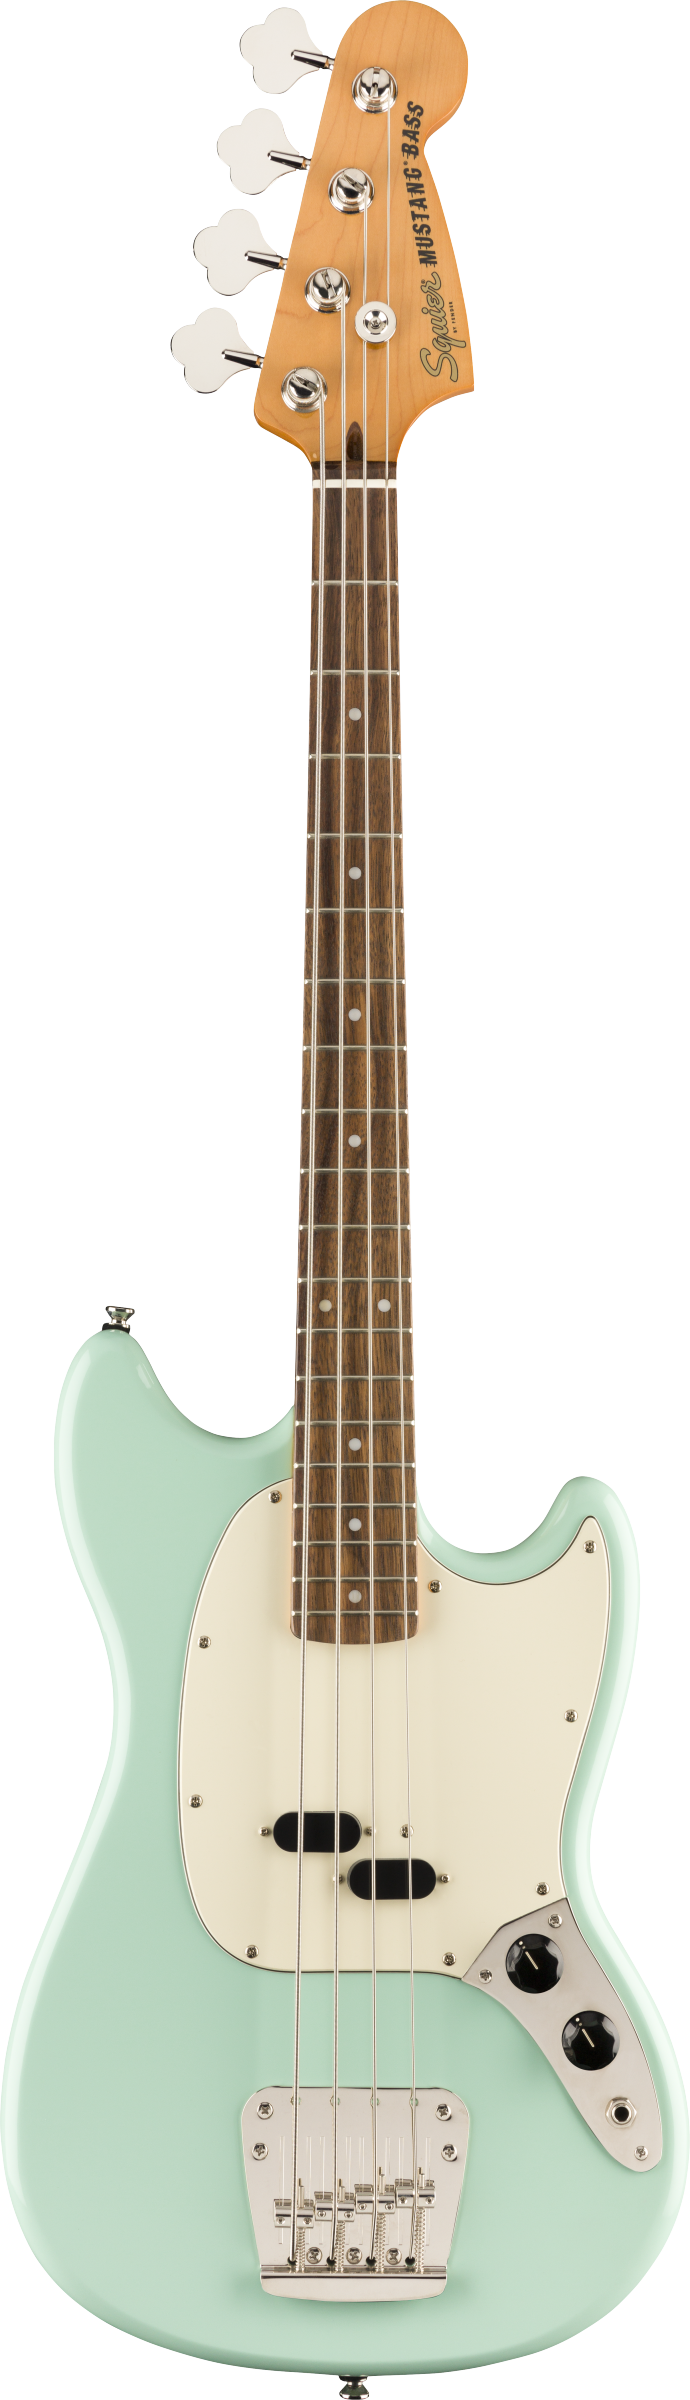 Full frontal of Squier Classic Vibe '60s Mustang Bass Laurel Fingerboard Surf Green.